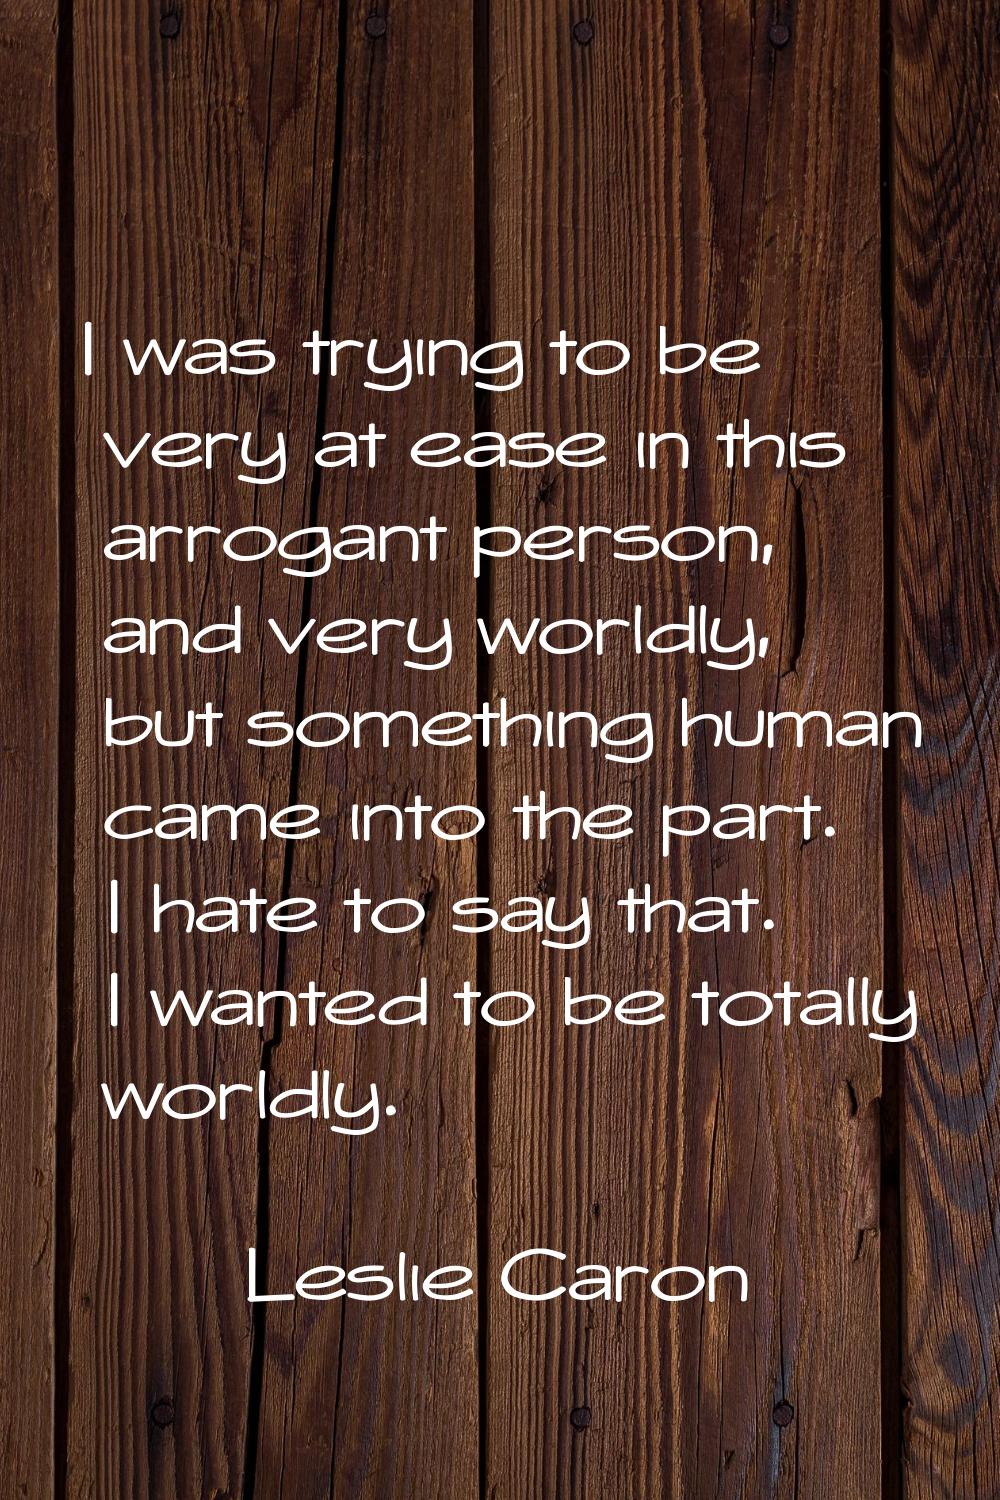 I was trying to be very at ease in this arrogant person, and very worldly, but something human came